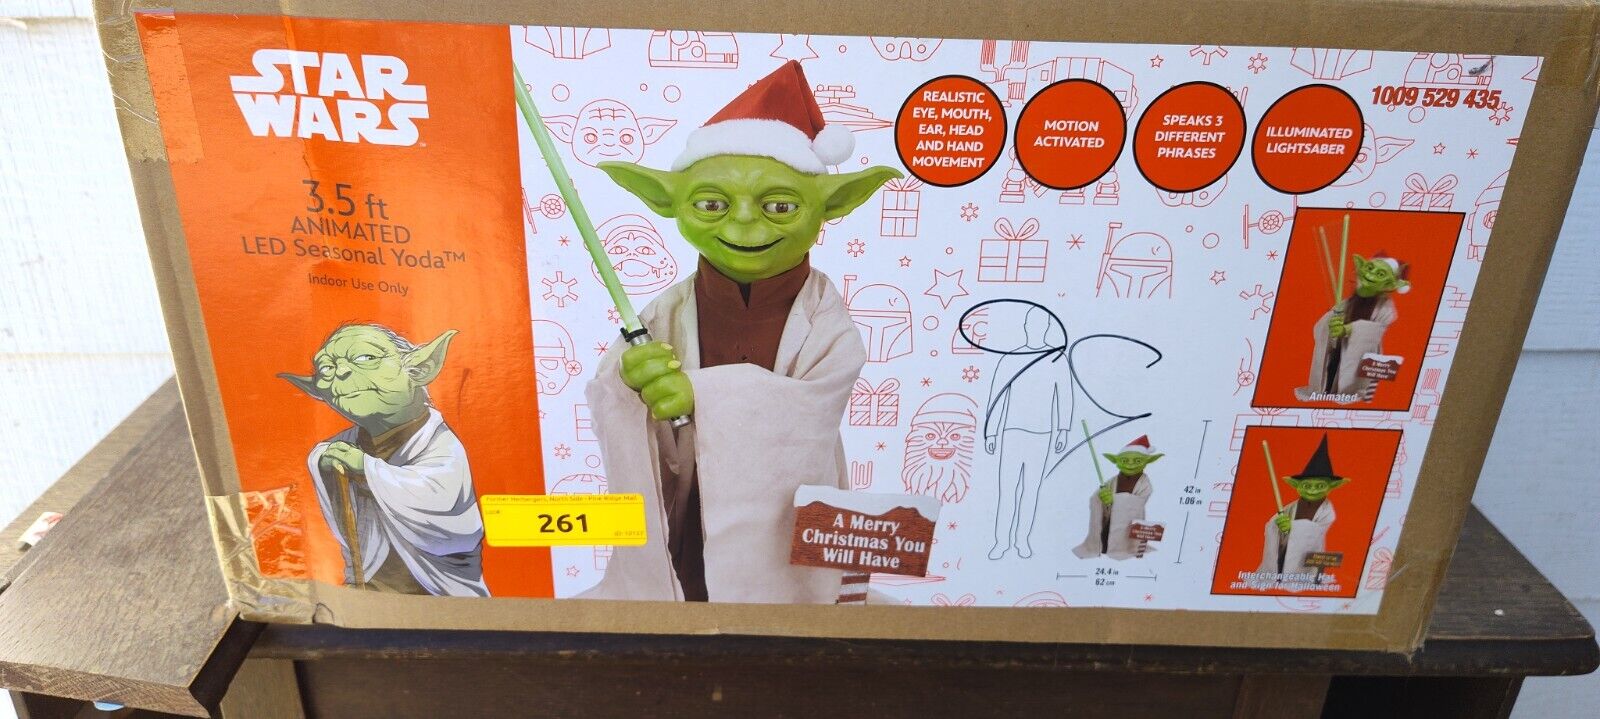 Brand NEW Star Wars 3.5 ft Animated LED Seasonal Yoda Indoor Use Only Home Decor